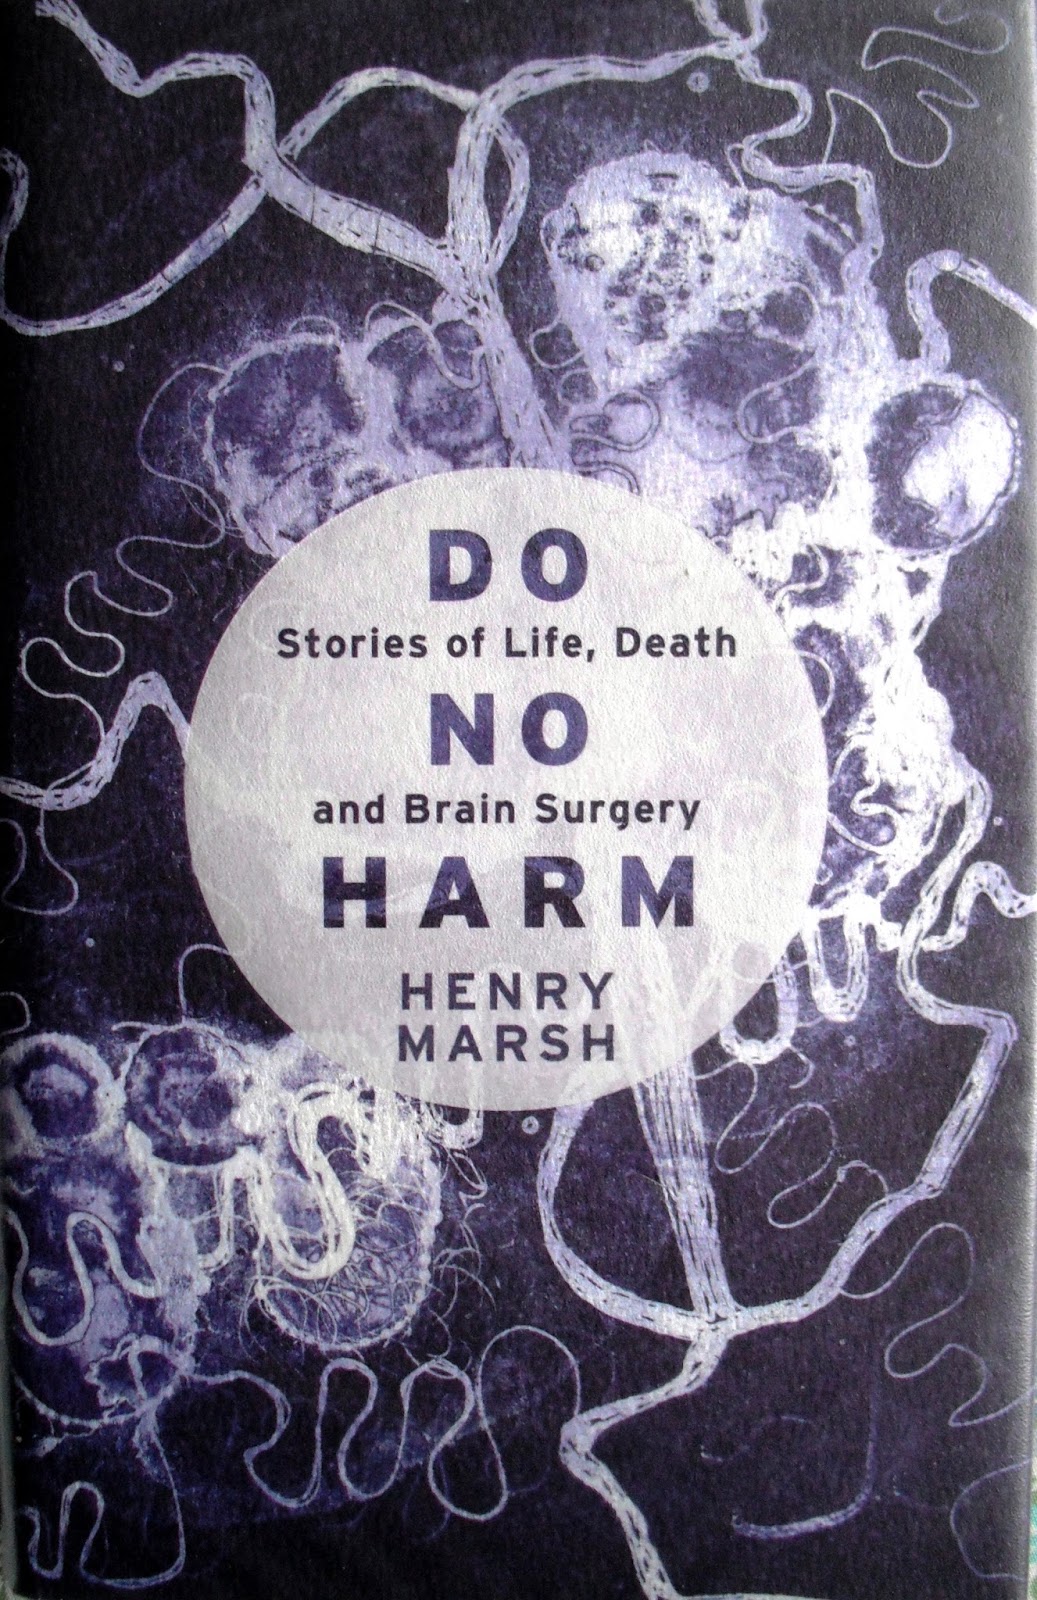 Life After Money Do No Harm by Henry Marsh. Book review